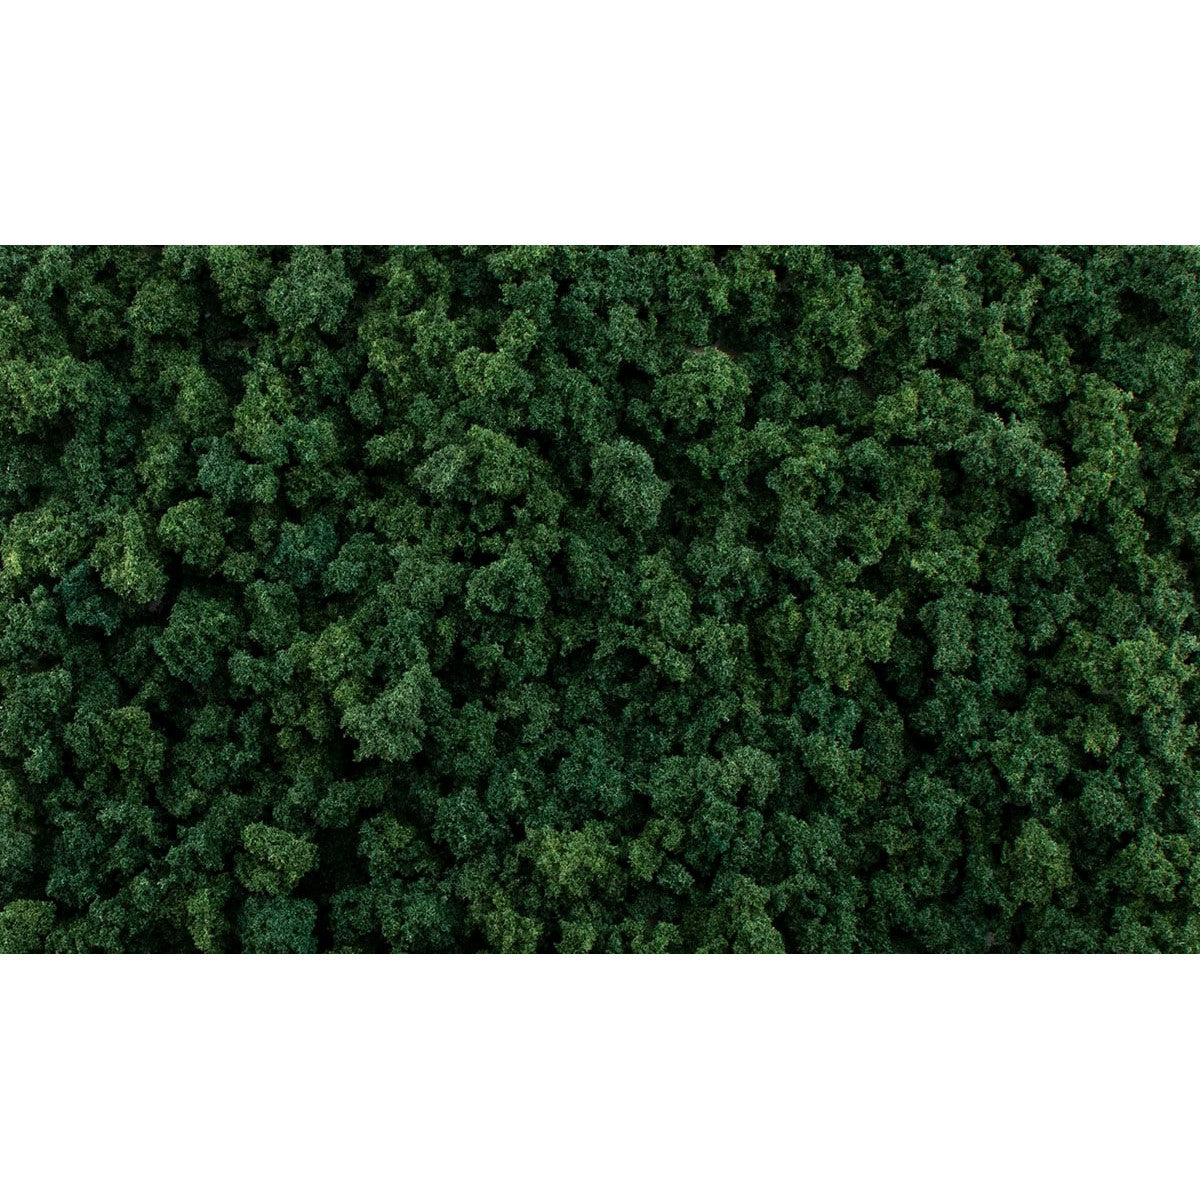 Dark Green Foliage Clumps - Dark Green Foliage Clumps make it easy to add bushes, shrubbery and trees to your terrain feature, miniature base or gaming boards